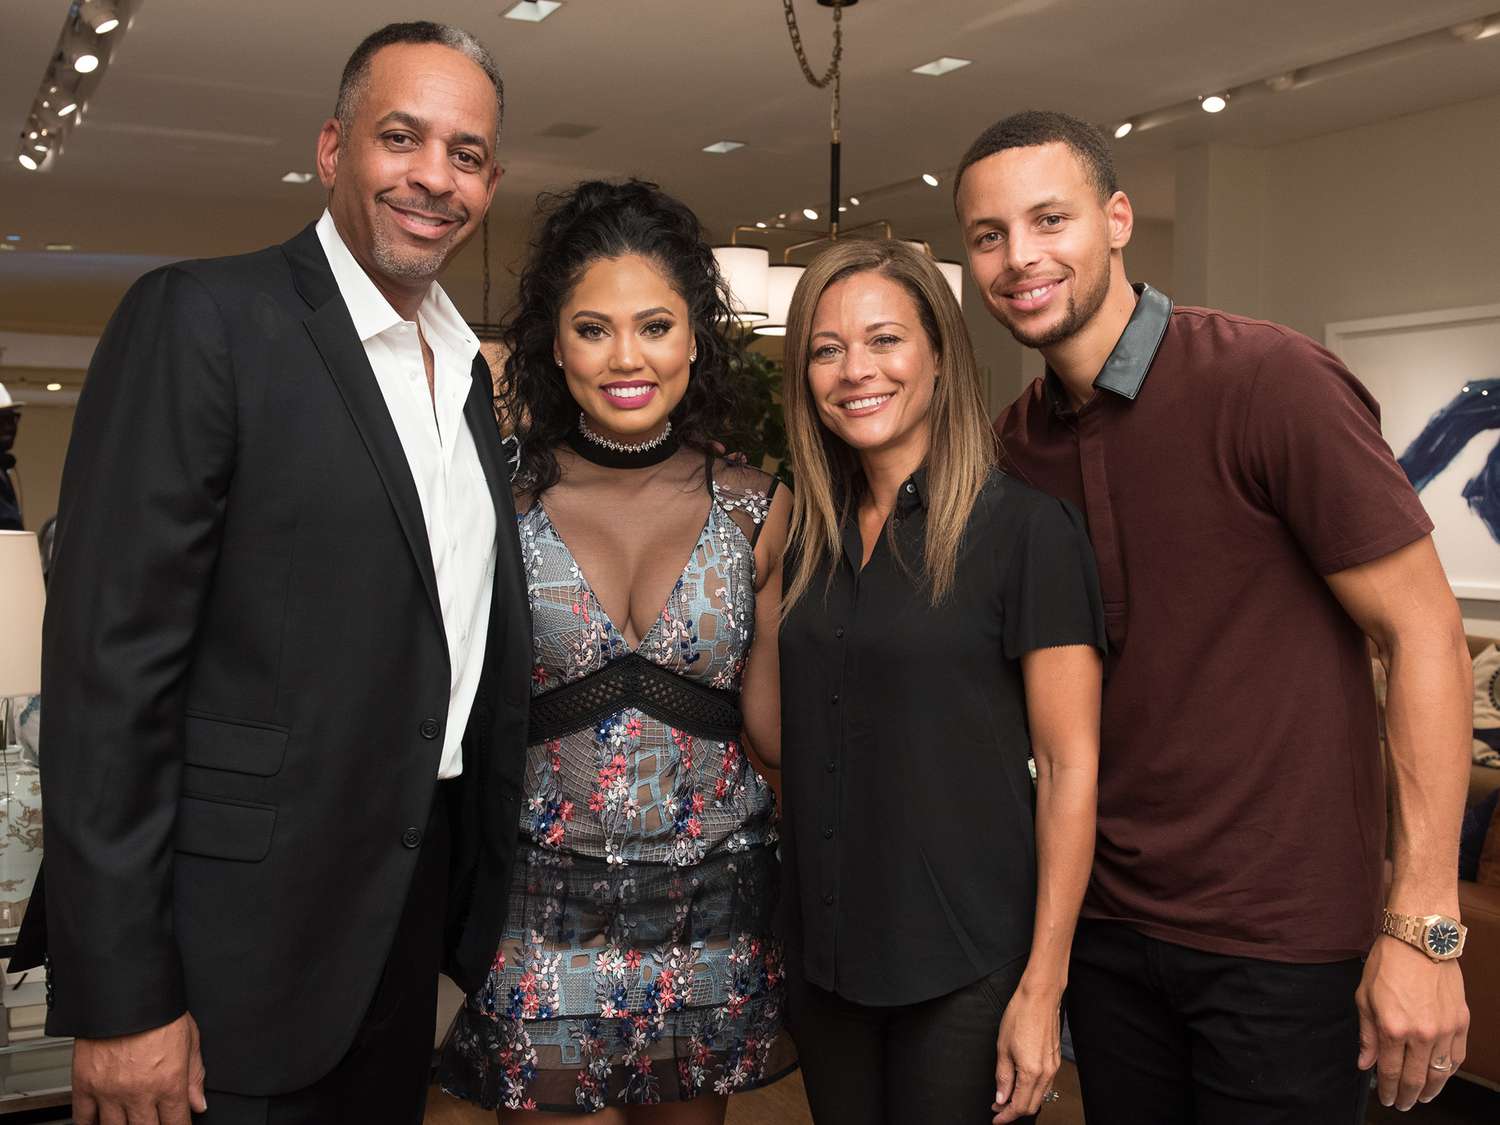 likhoa stephen curry surprised the world by revealing little known things about his family including dell curry and ayesha 652e0ac51682d Stephen Curry Surprised The World By Revealing Little-known Things About His Family Including Dell Curry And Ayesha